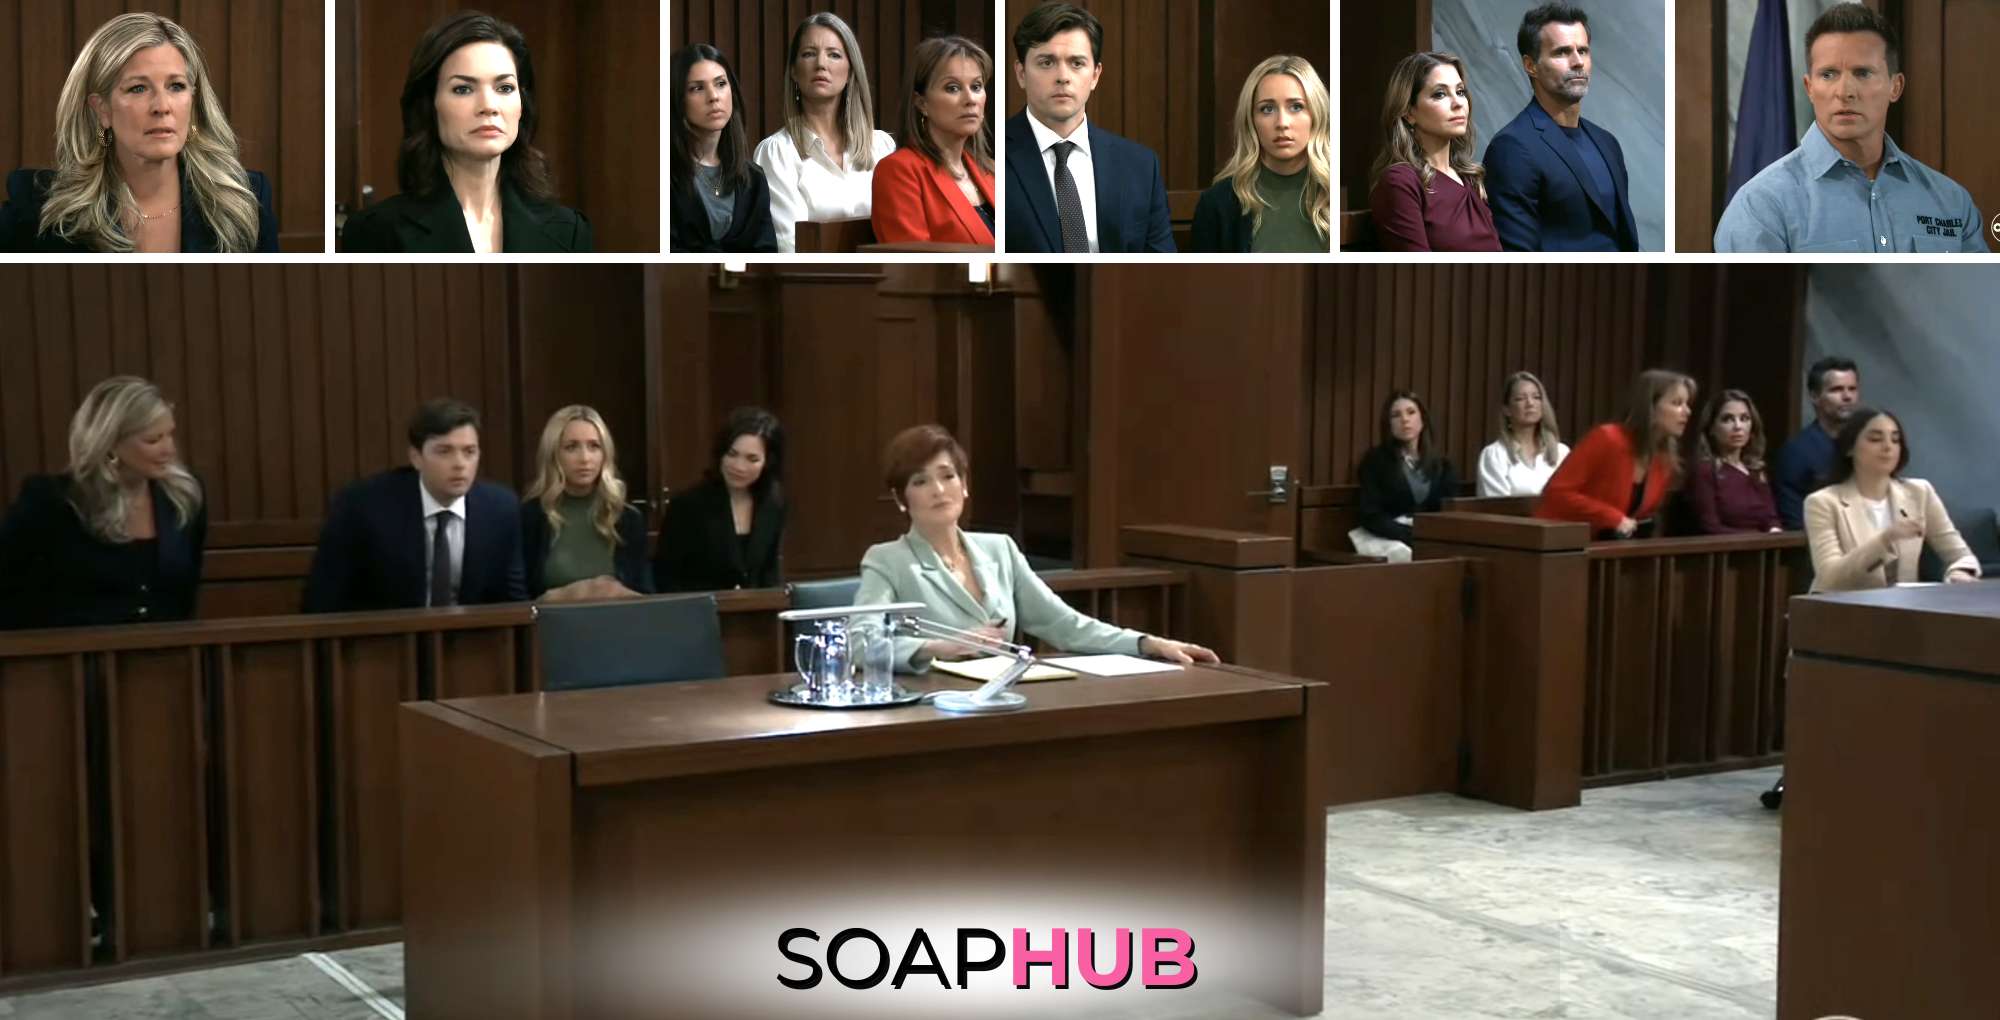 The General Hospital recap for Thursday, March 28 features Jason's arraignment with the Soap Hub logo across the bottom.